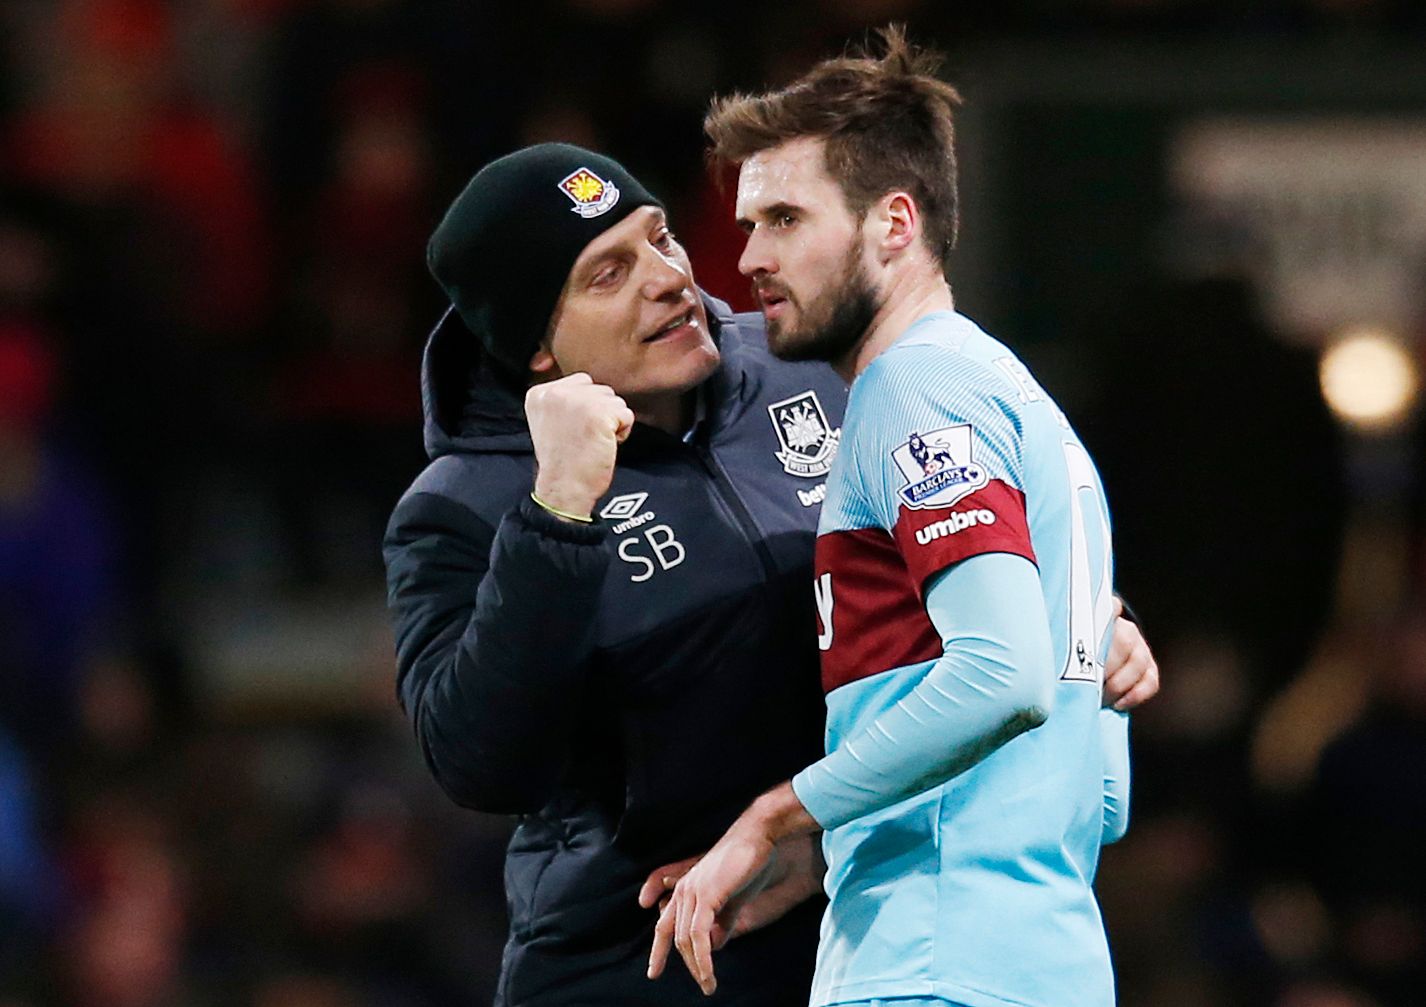 West Ham manager Slaven Bilic speaks with Carl Jenkinson
Mandatory Credit: Action Images / Paul Childs
Livepic
EDITORIAL USE ONLY. No use with unauthorized audio, video, data, fixture lists, club/league logos or 